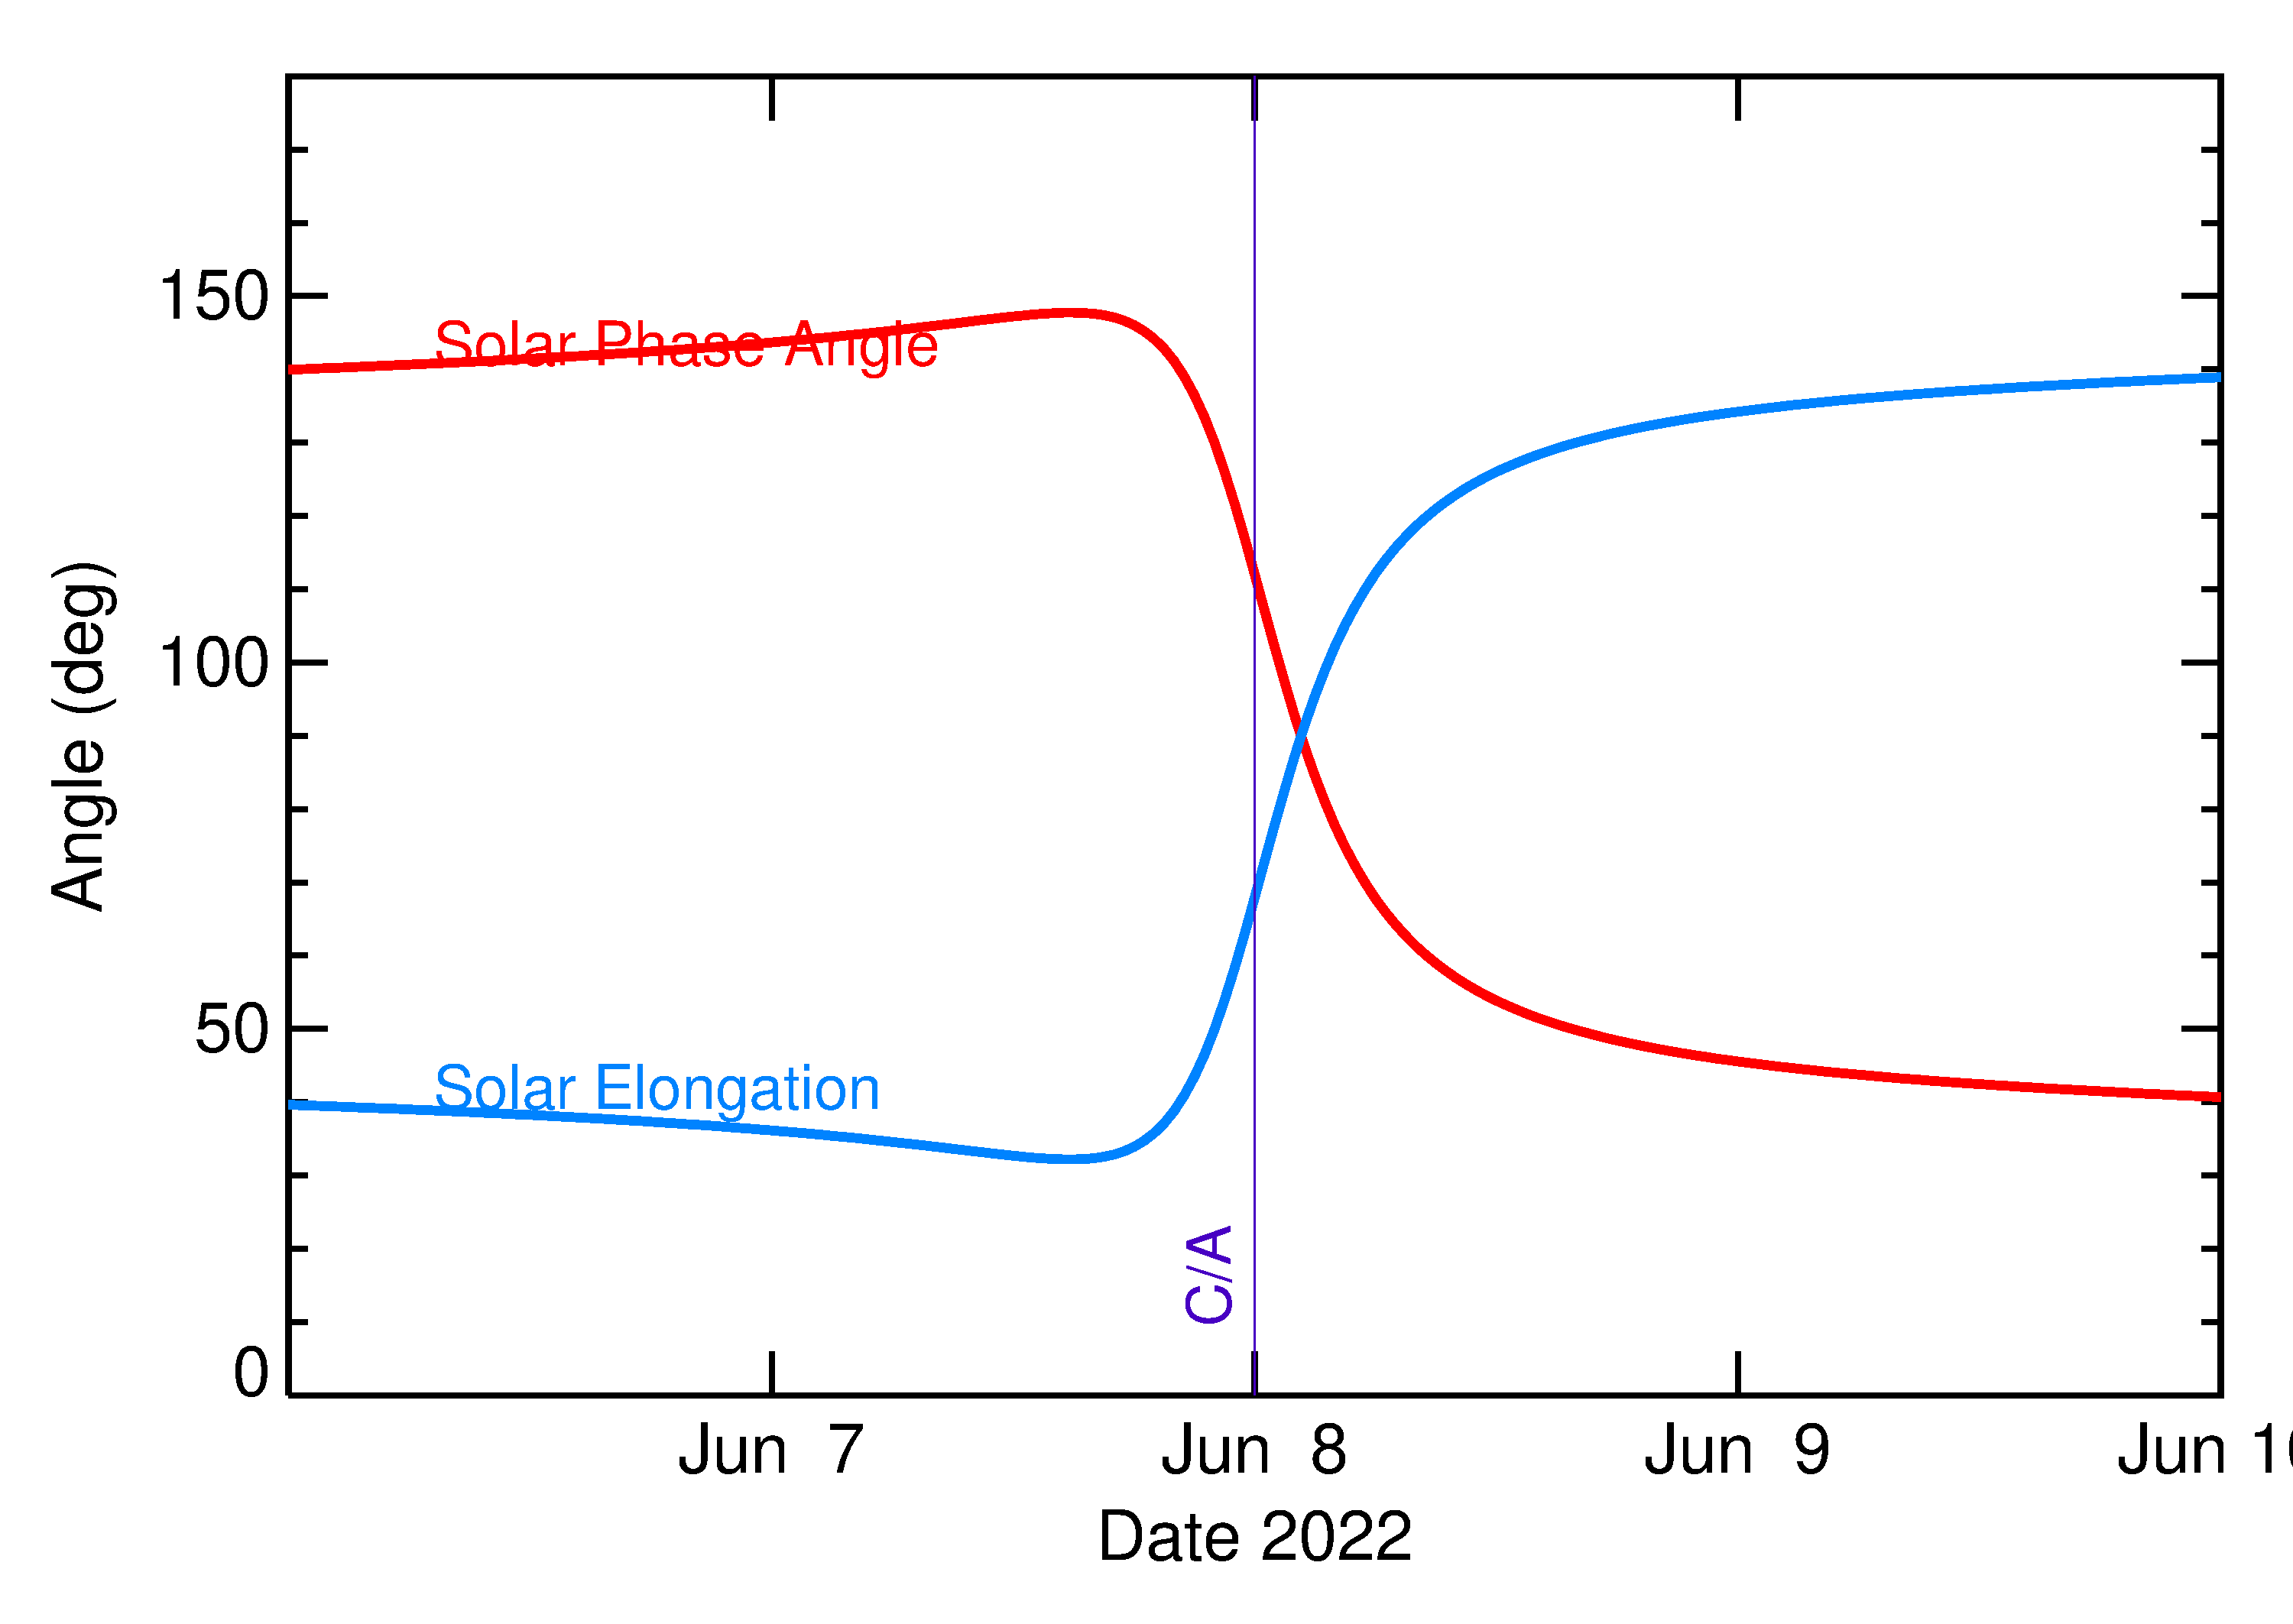 Solar Elongation and Solar Phase Angle of 2022 LU2 in the days around closest approach